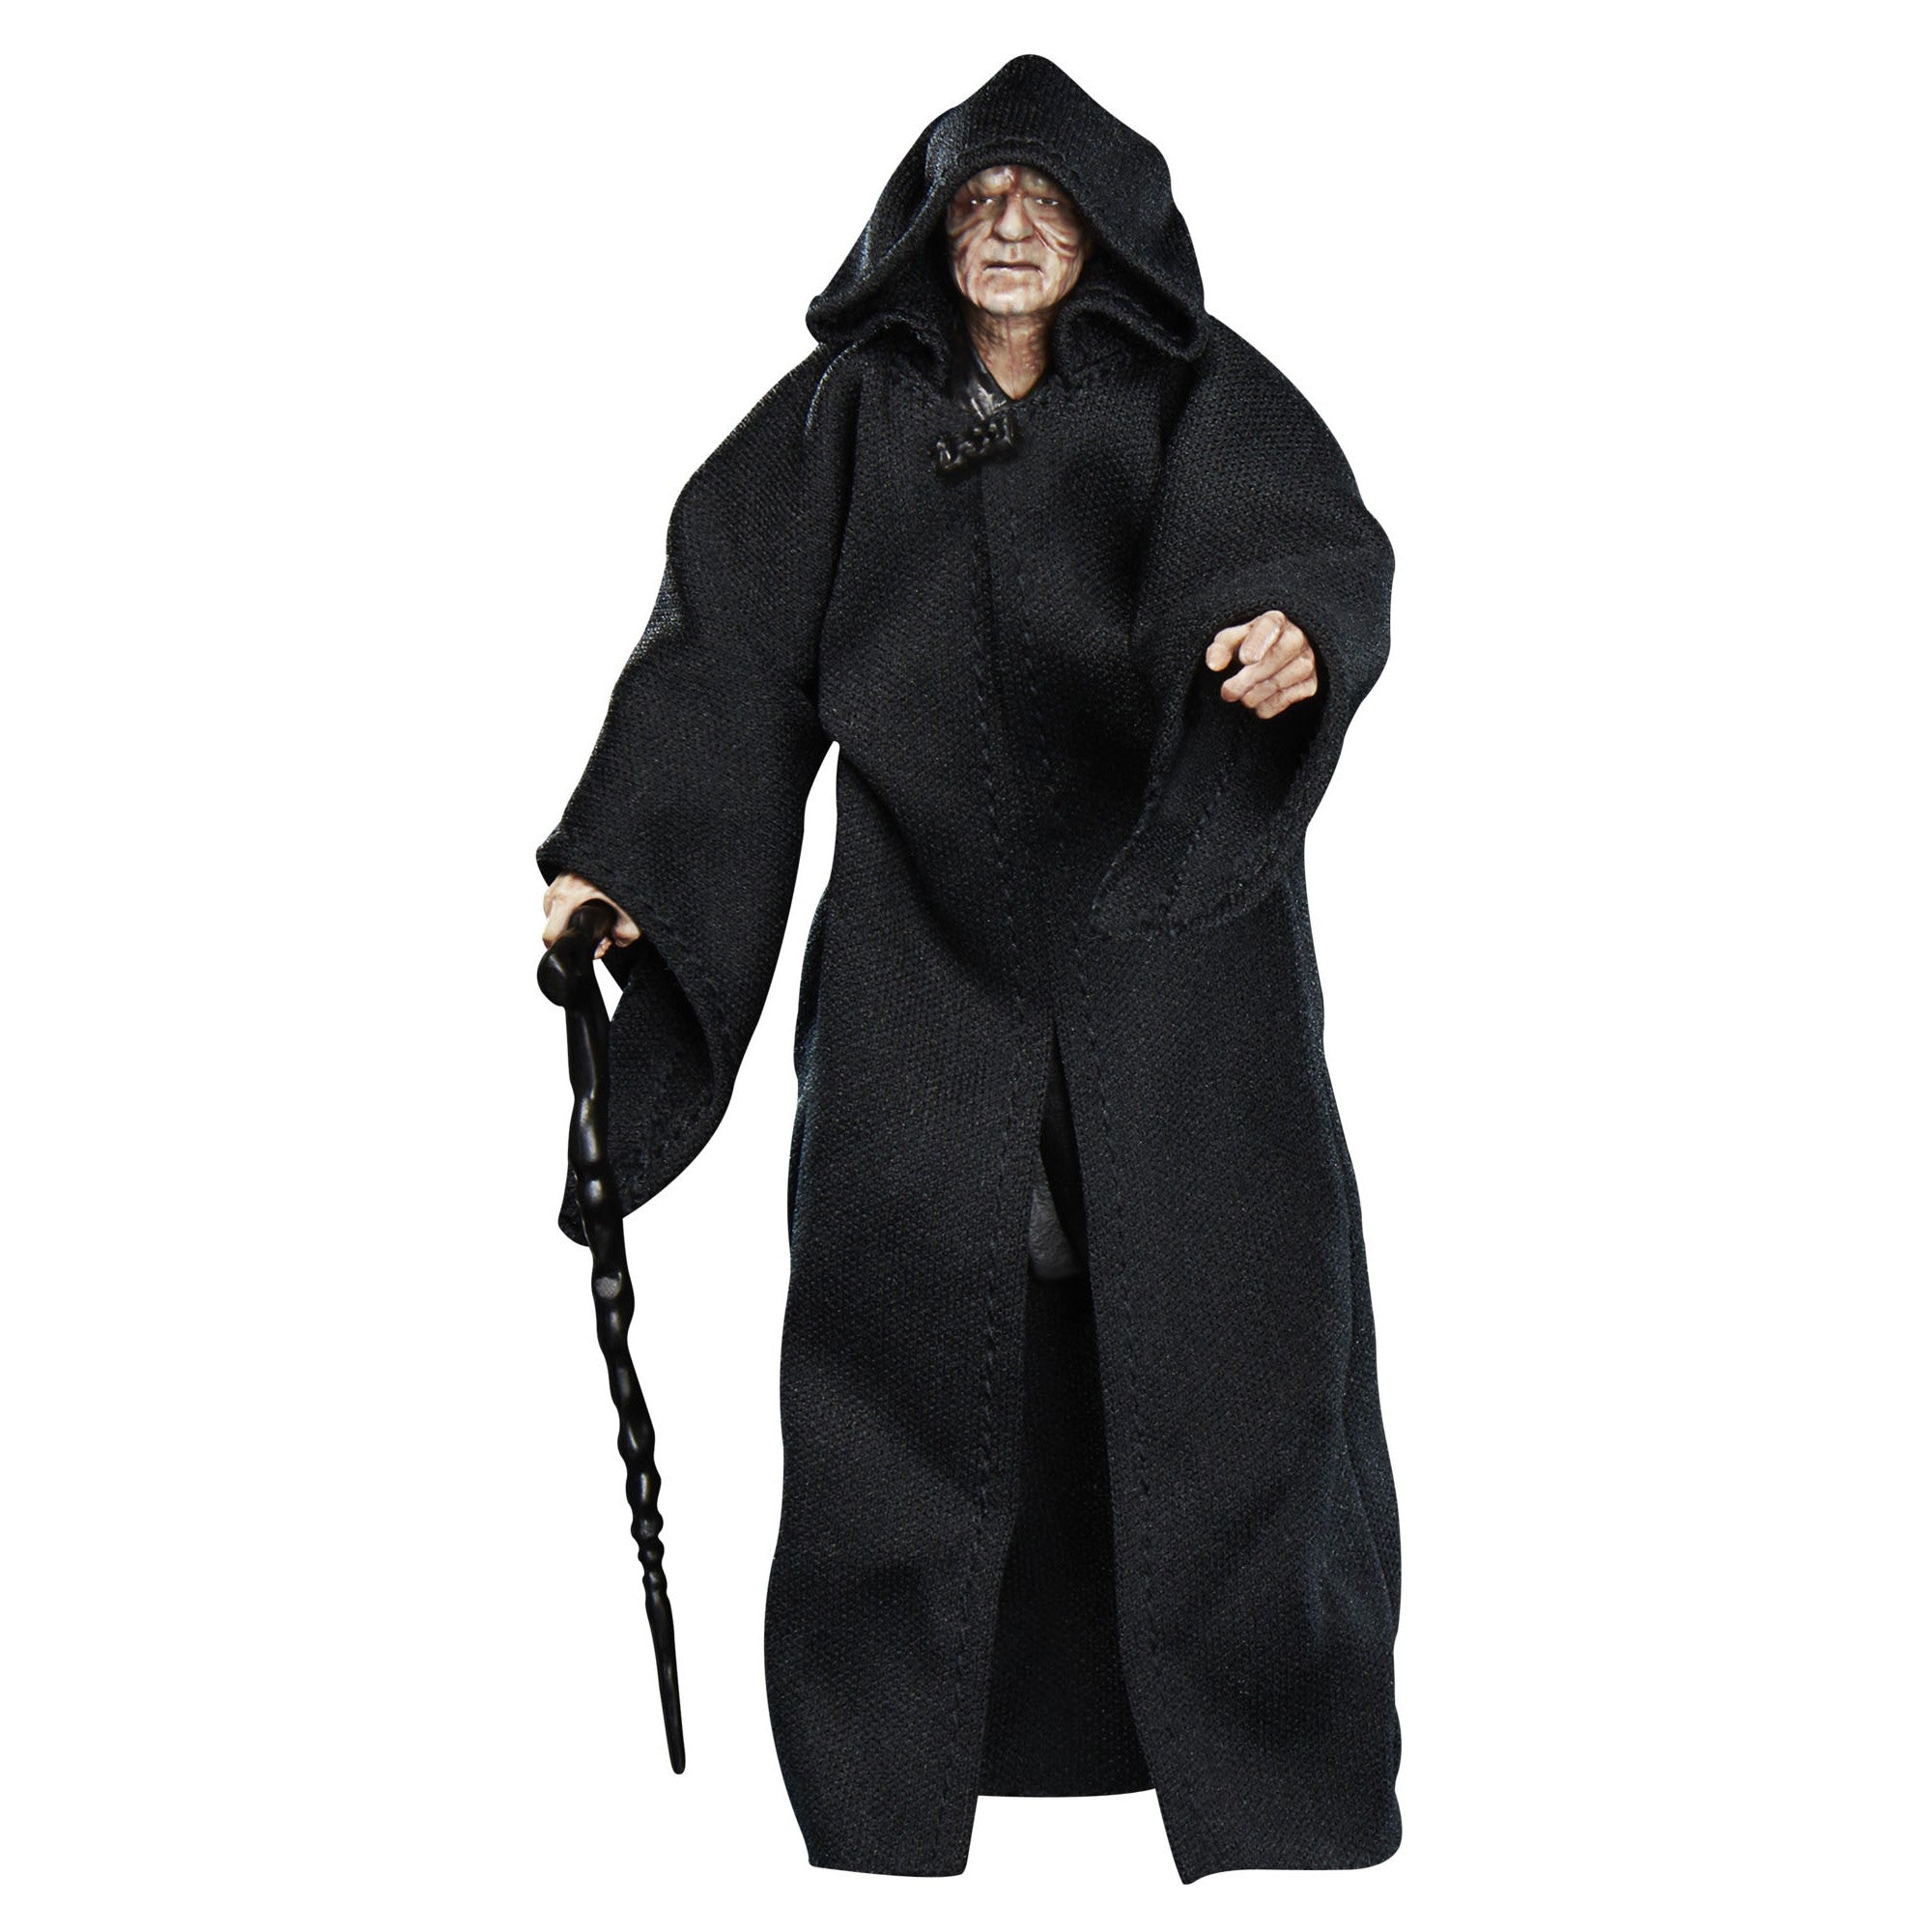 Star Wars Black Series 6" Archive Collection Emperor Palpatine - 0